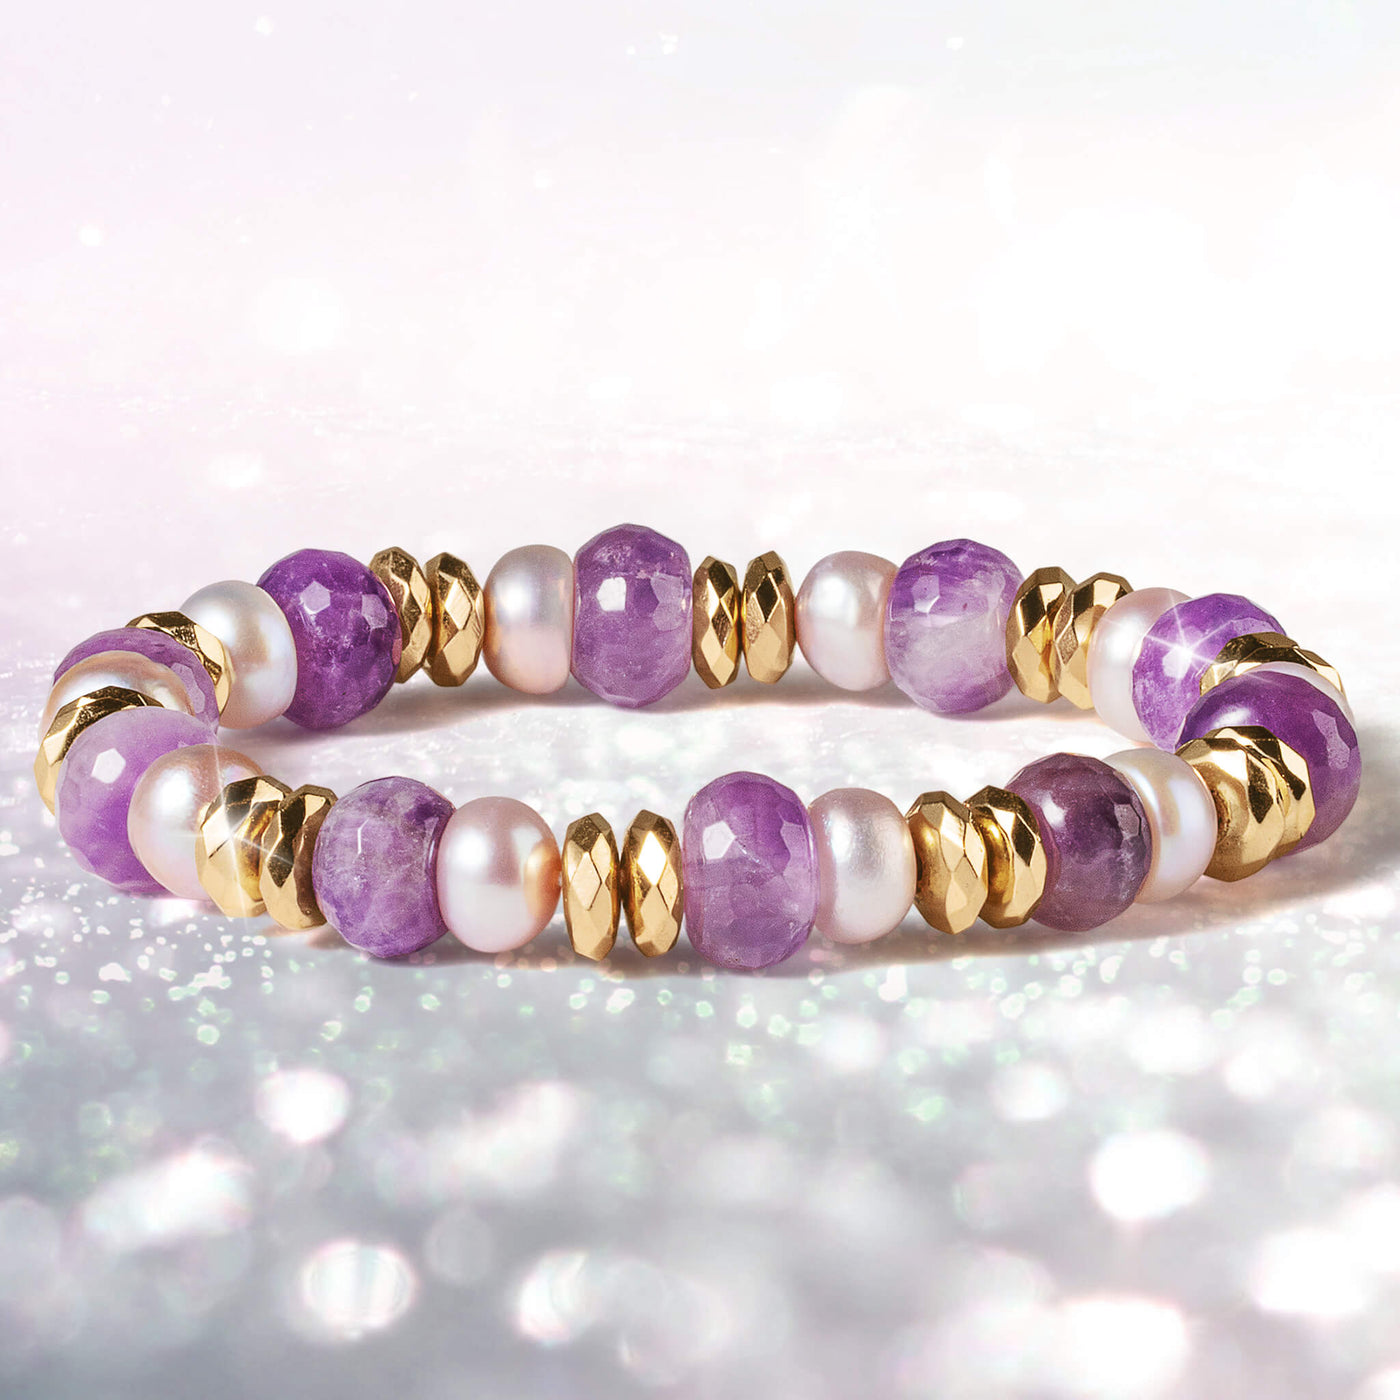 Island Oasis Amethyst Collection